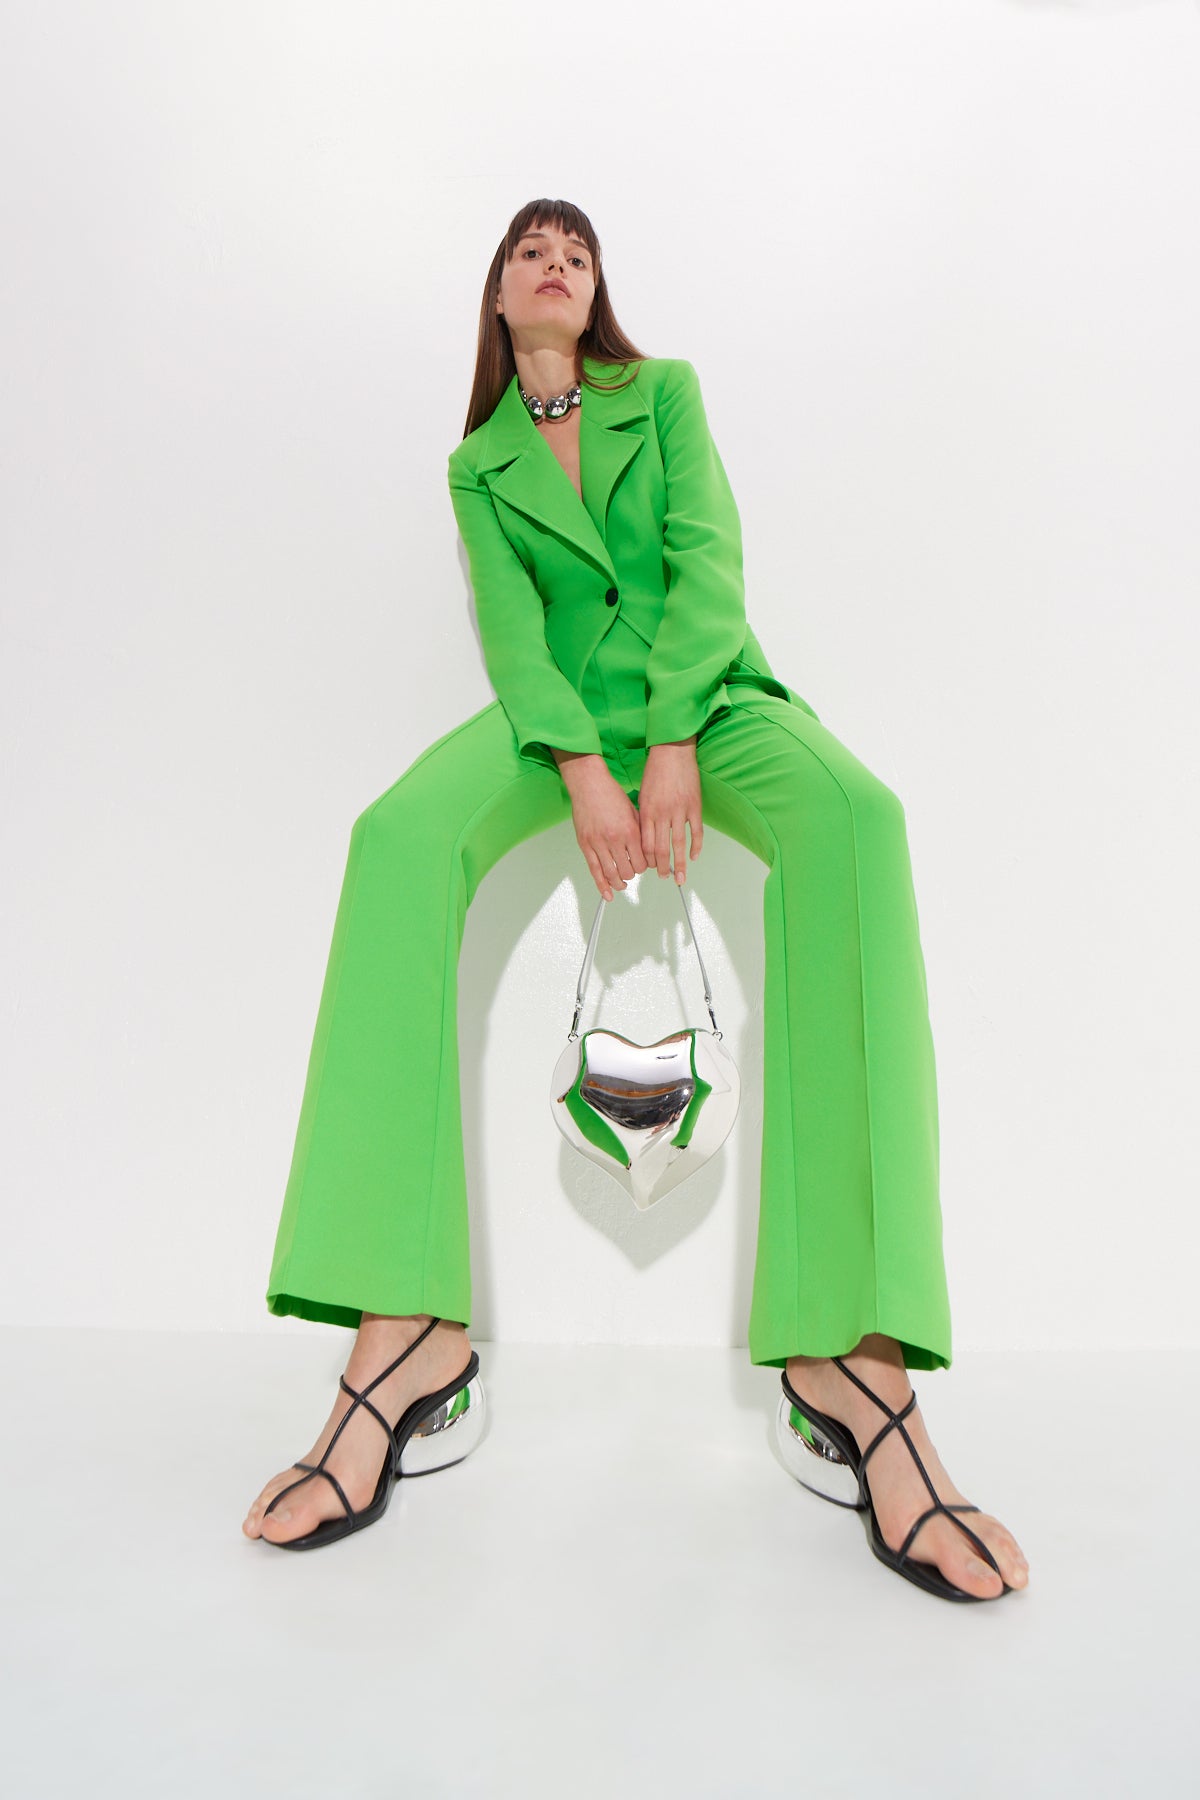 W6072-SOLA-CREPE-BLAZER-GUMMY-GREEN-WITH-MOLDED-HEAR-BAG-SILVER-FULL-BODY-SHOT-ANGLED-UP